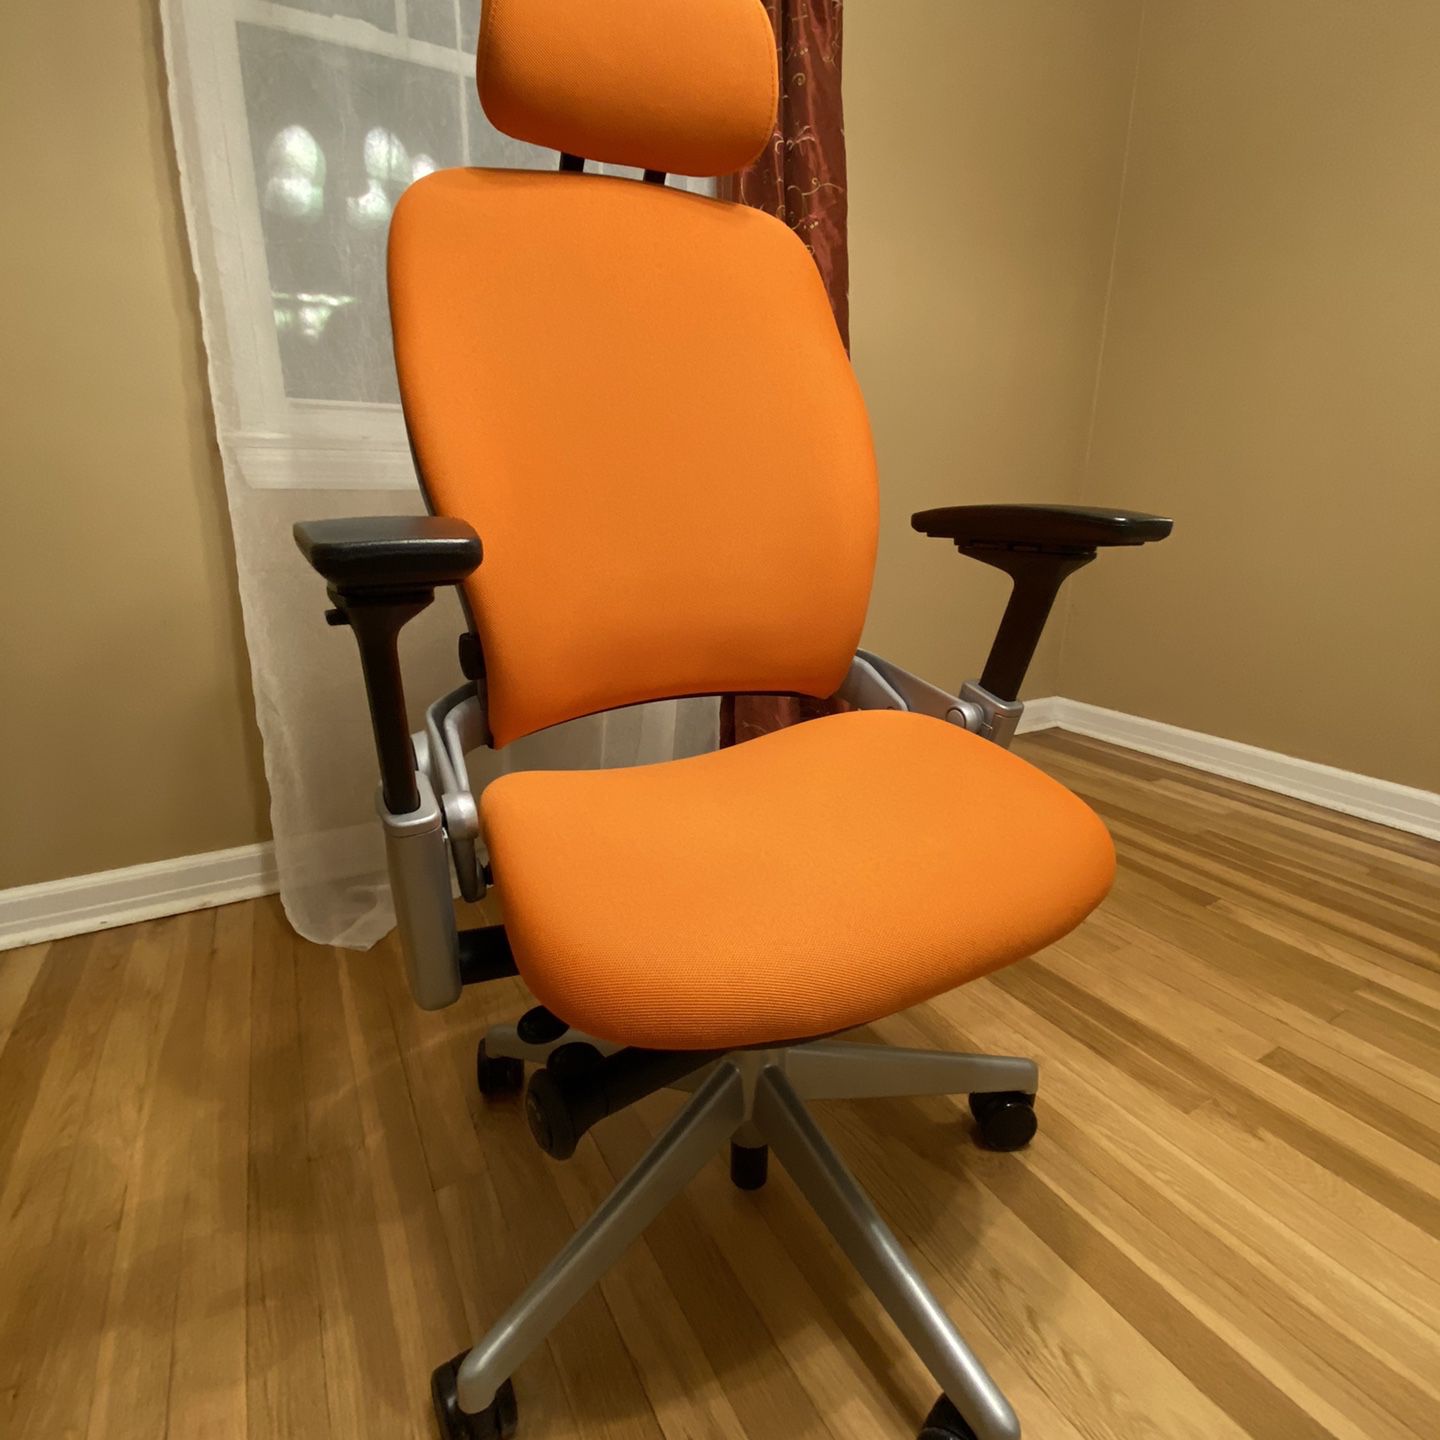 Steelcase Leap Chairs (selling two, Priced As ONE)